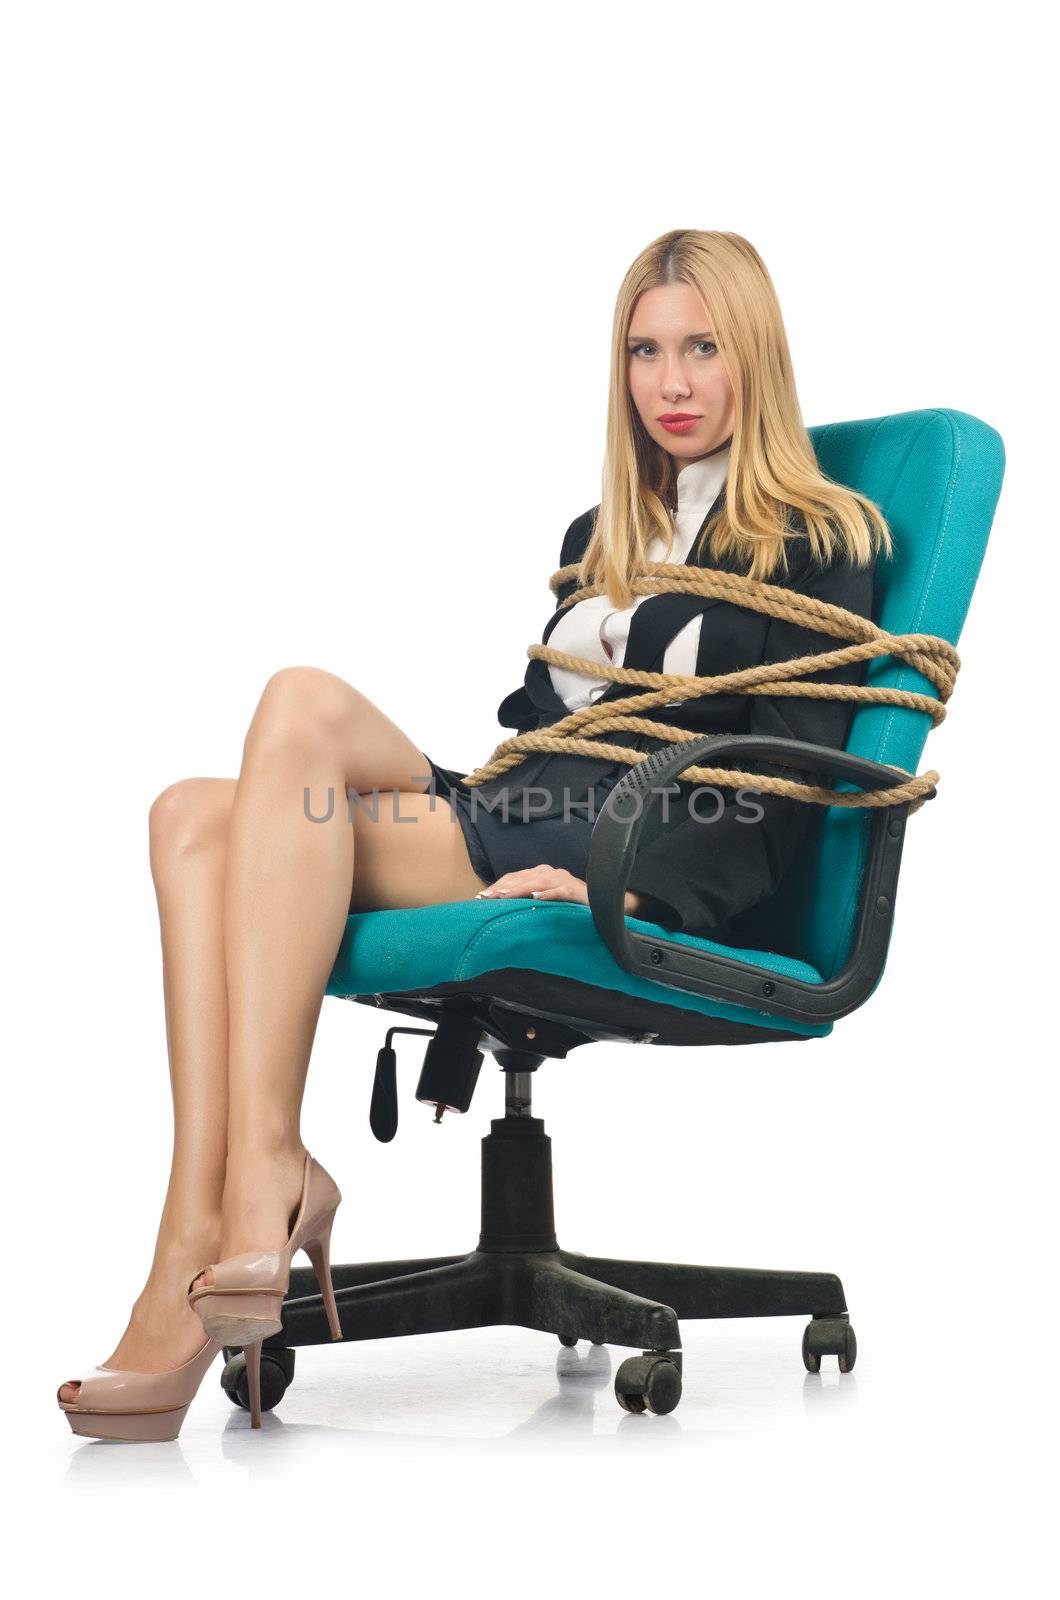 Businesswoman woman tied up with rope on white